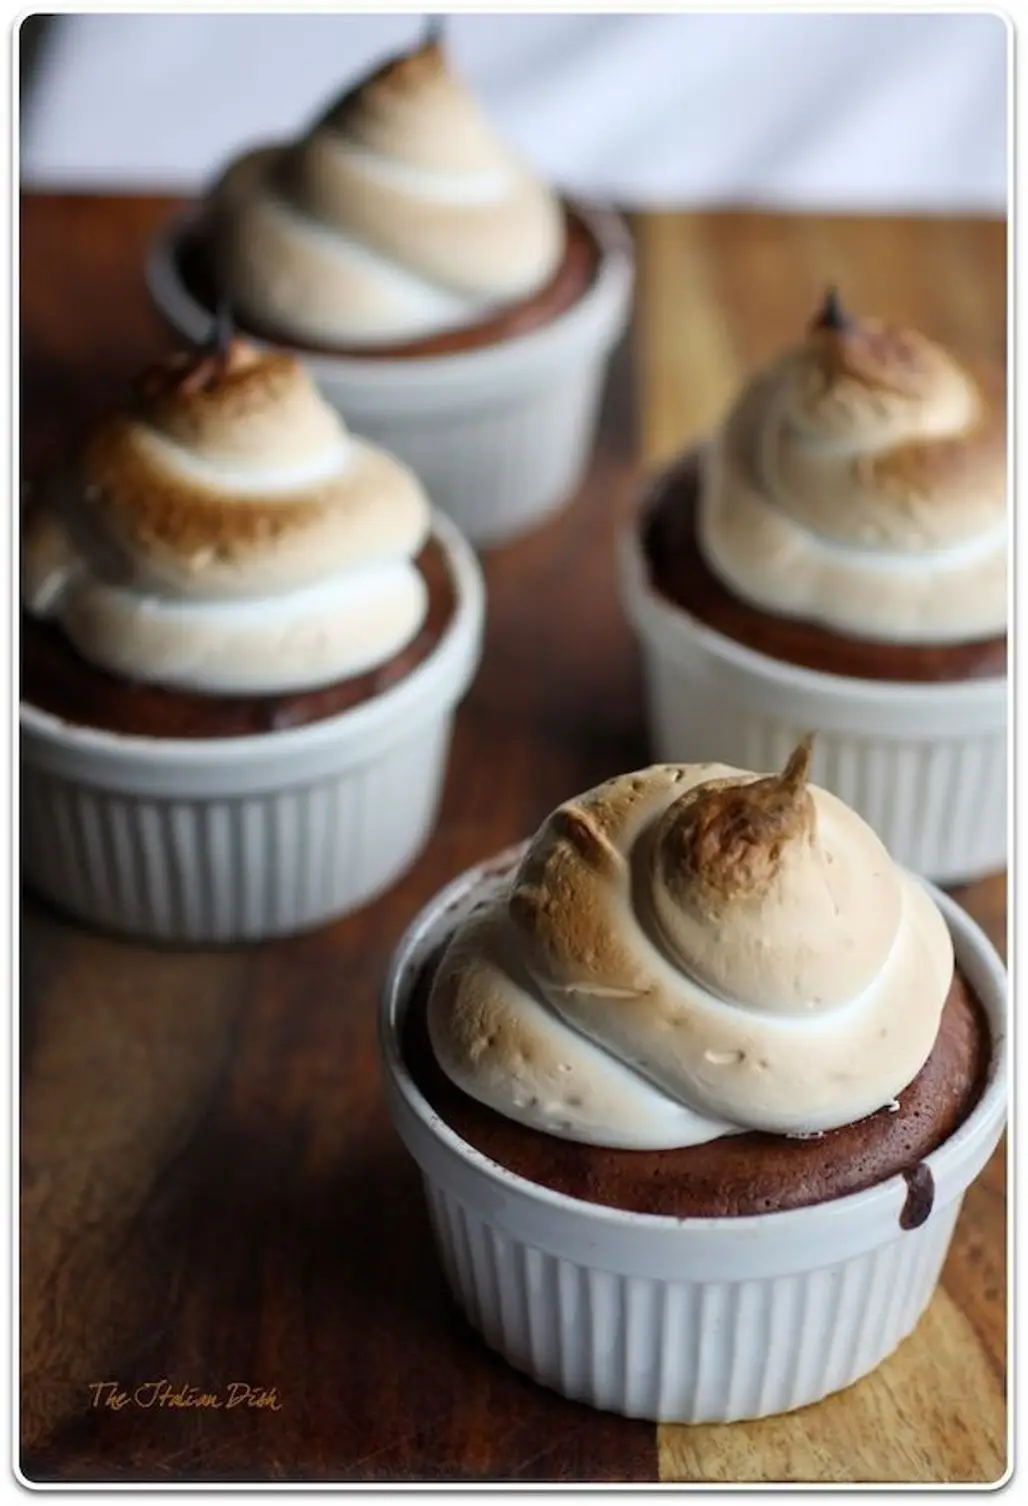 Warm Chocolate Cakes with Toasted Marshmallow Meringue